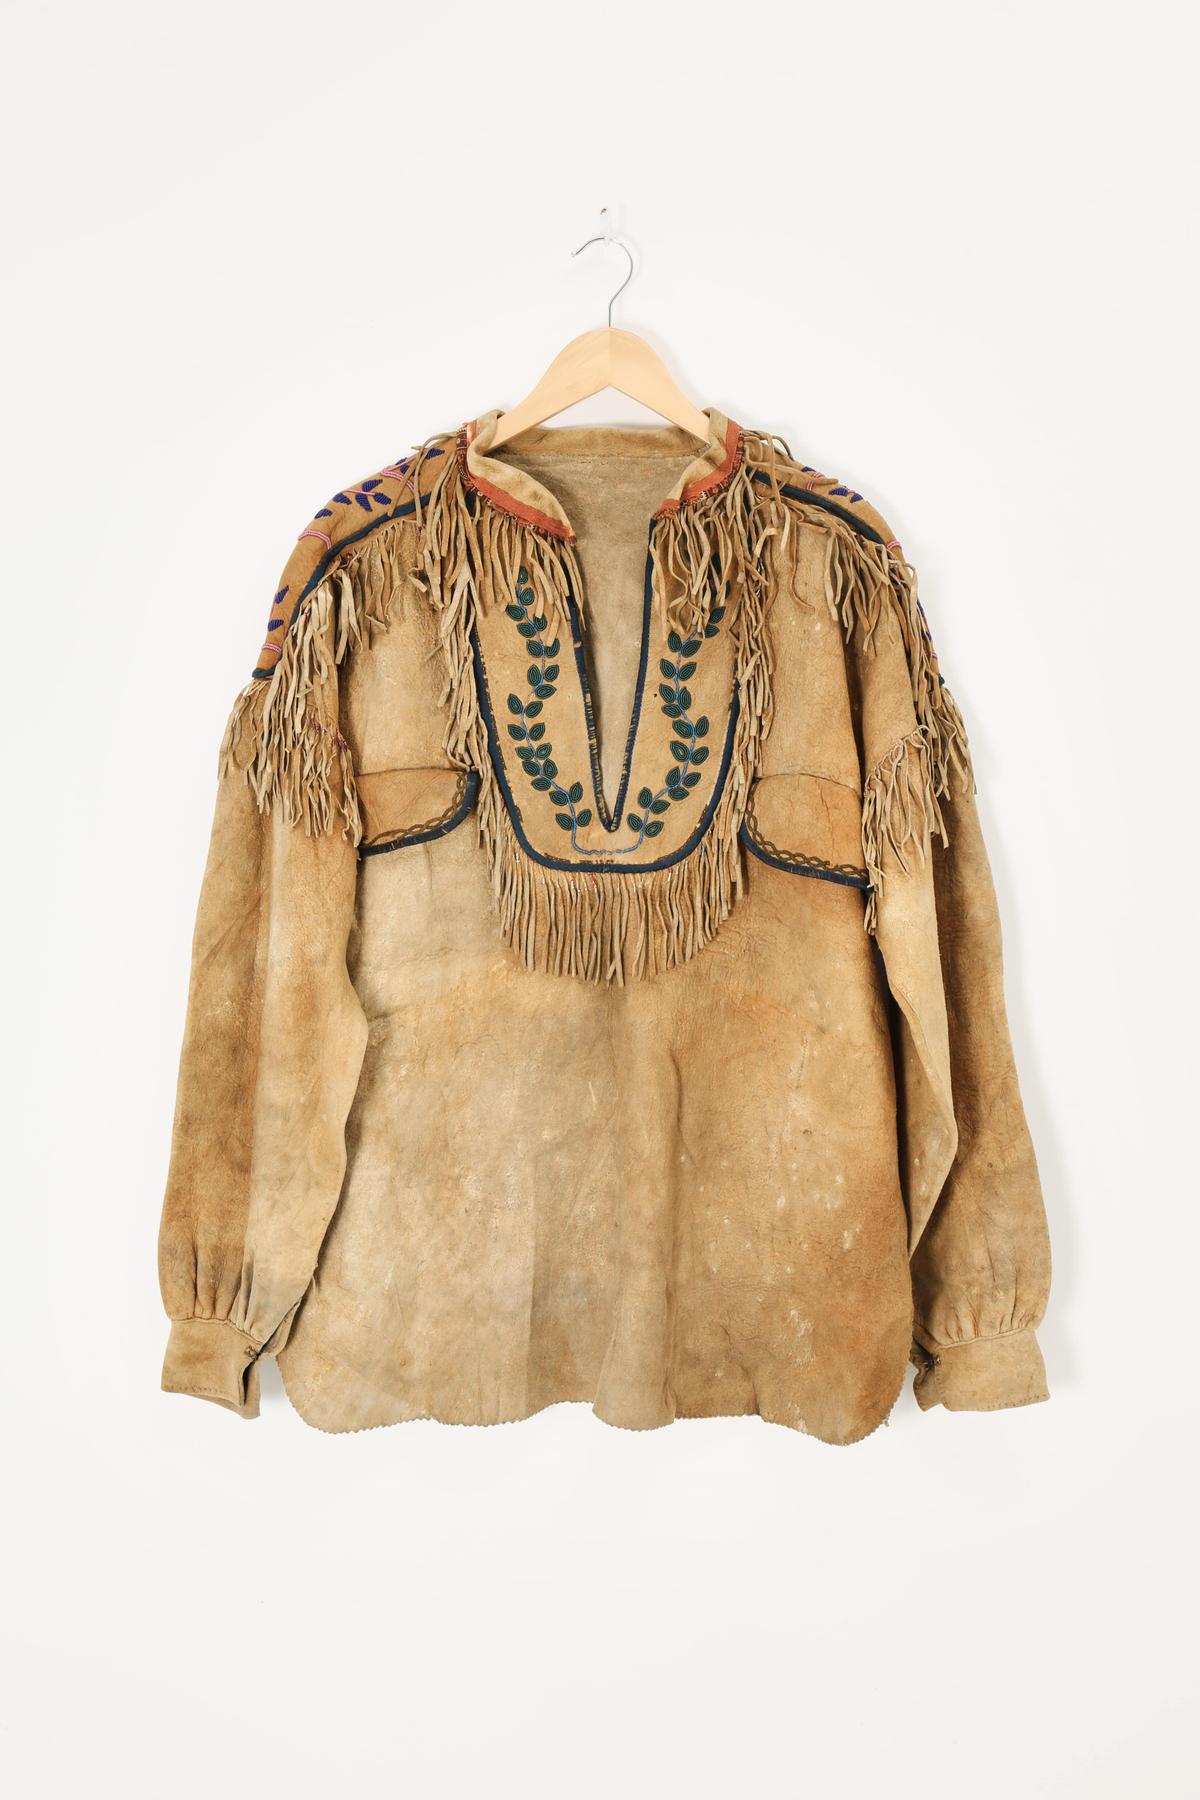 Believed to be of Native American make, the jacket's exact place of the origin is not yet determined for certain. (Courtesy of <a href="https://glass-onion.com/">Glass Onion Vintage</a>)